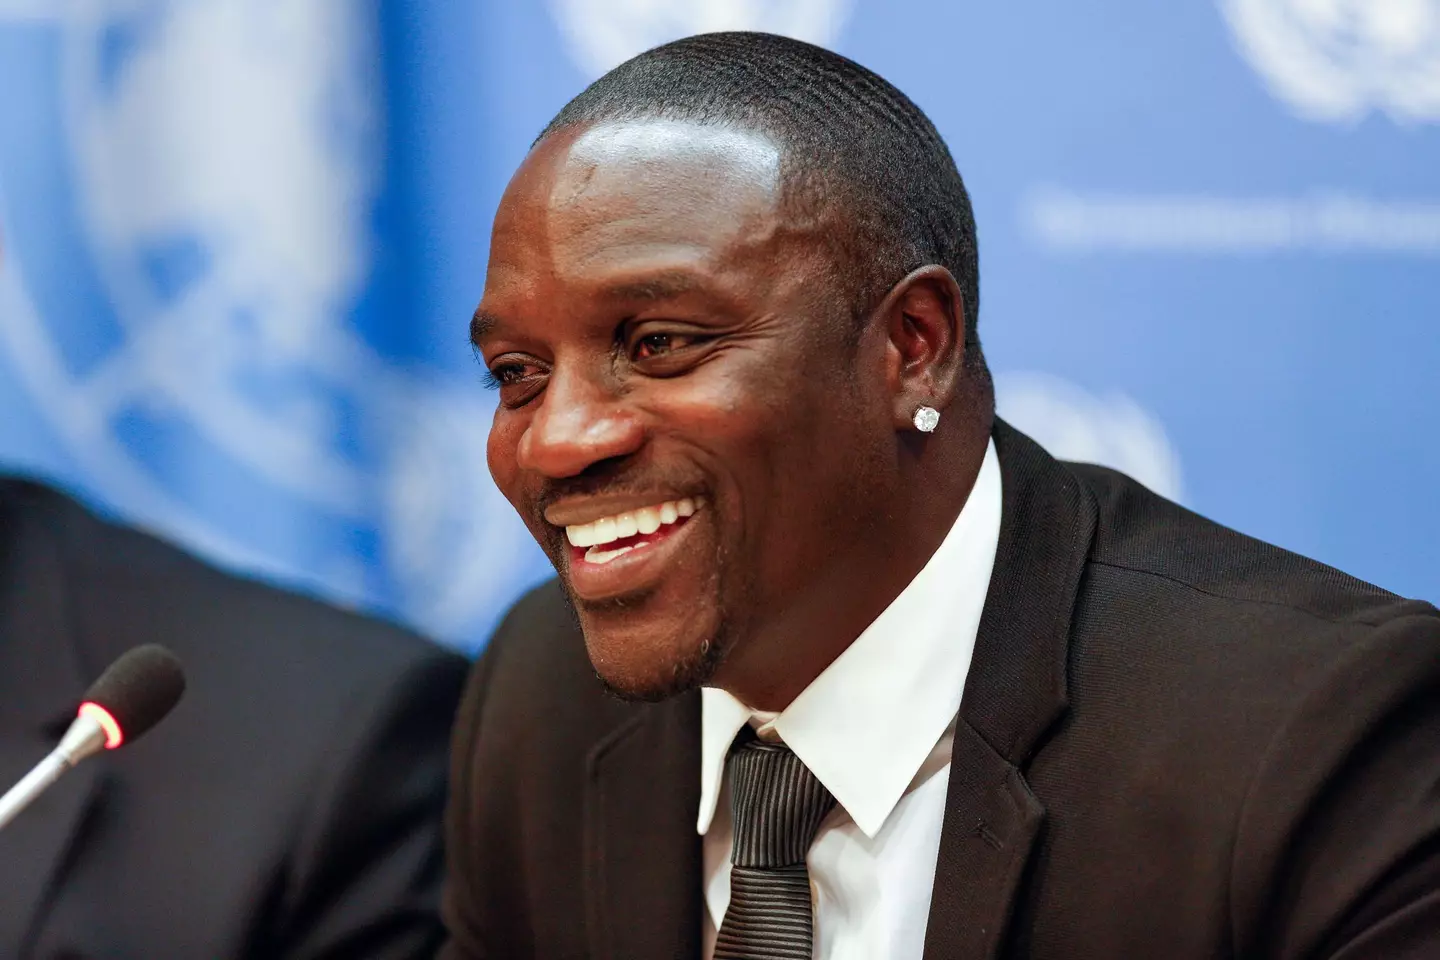 Akon views it as 'a lot more' to just have one wife.